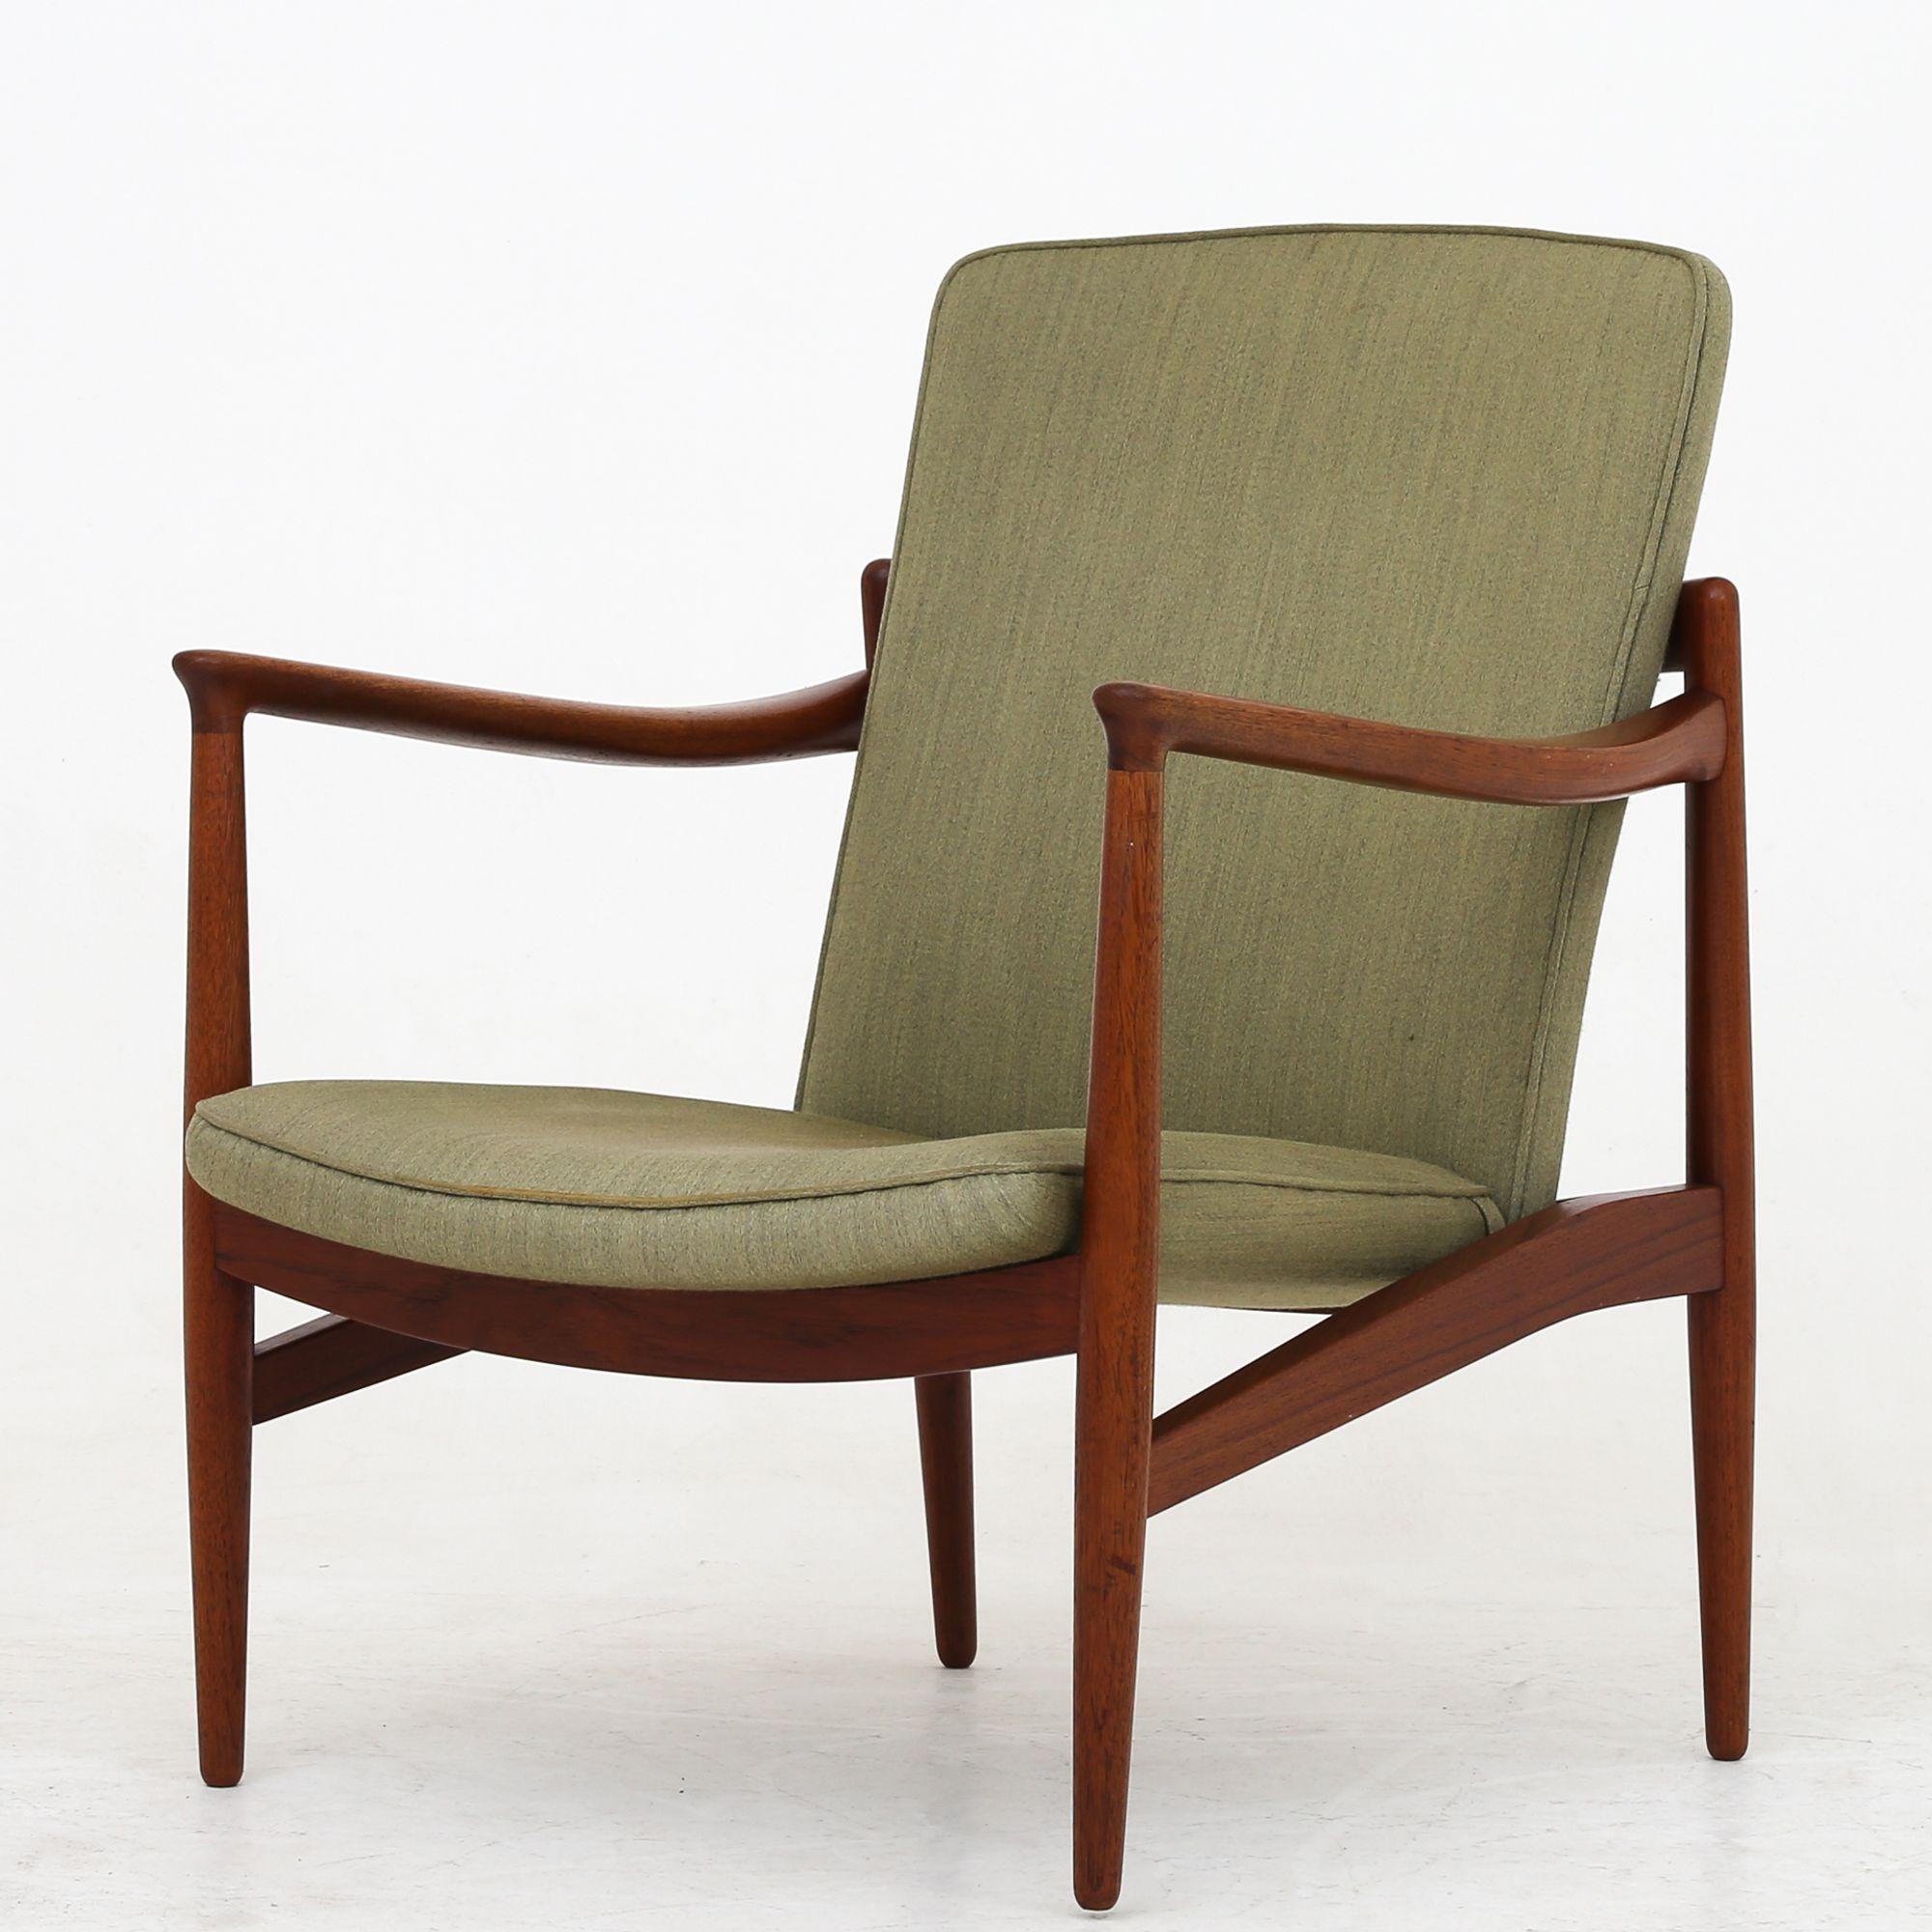 Easy chairs with solid teak frame, upholstered in original, green wool. Seat and back are adjustable. Originally mark from 1945. Jacob Kjær.